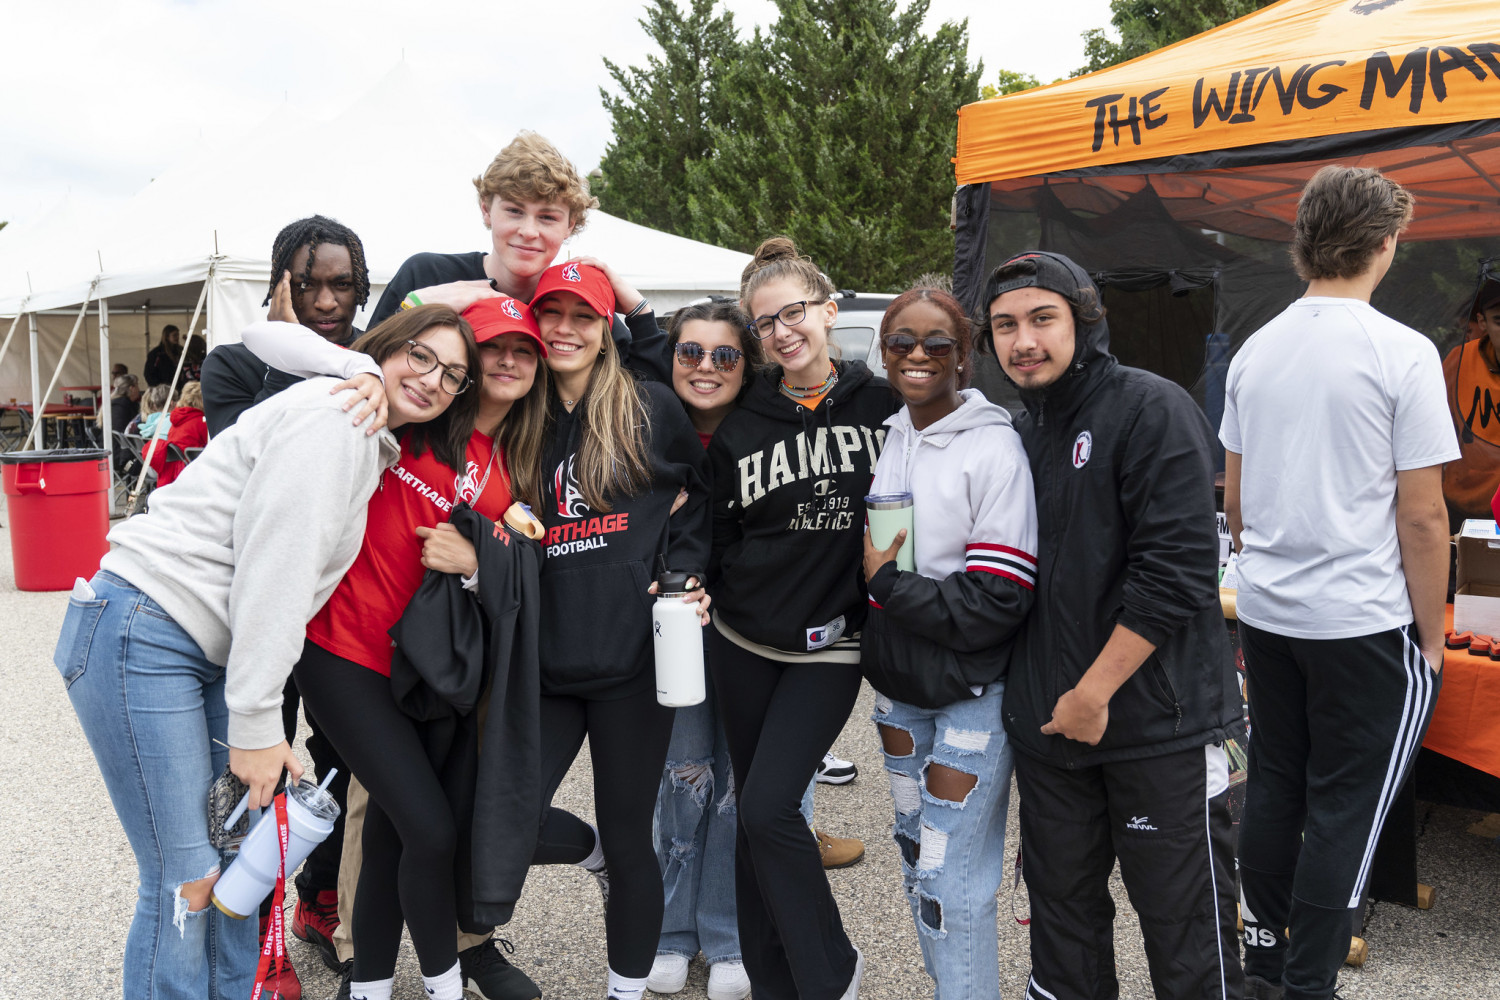 Alumni, students, and families gathered for a tailgate before the Homecoming Football game.